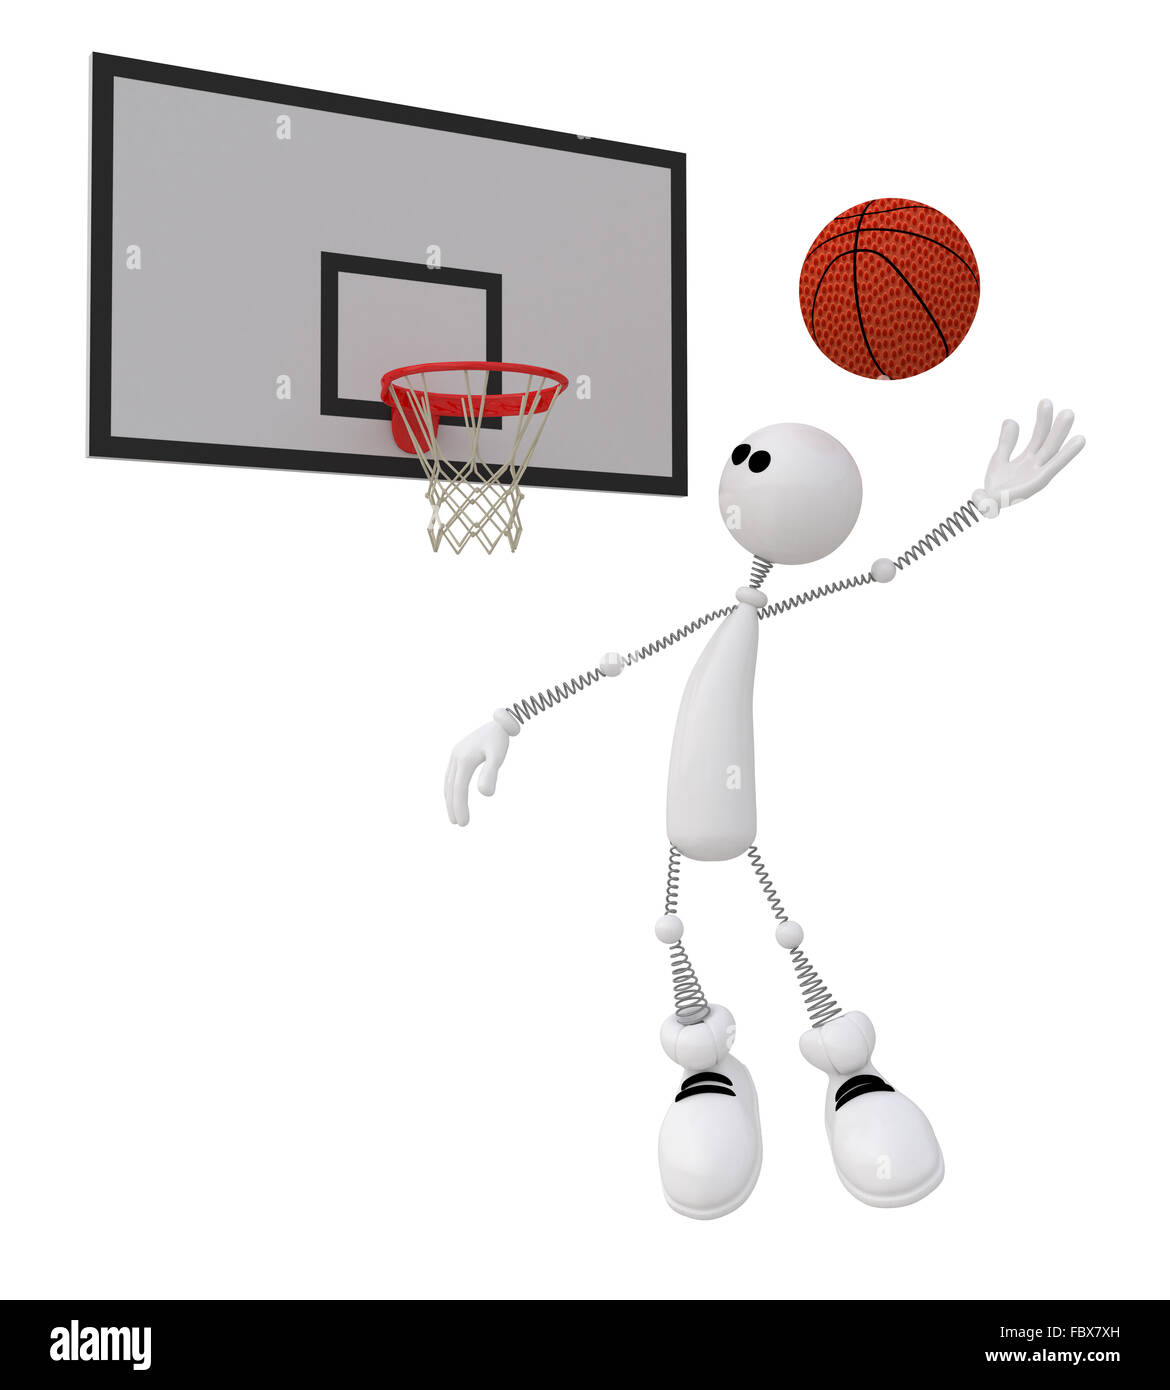 19,888 Yellow Basketball Images, Stock Photos, 3D objects, & Vectors